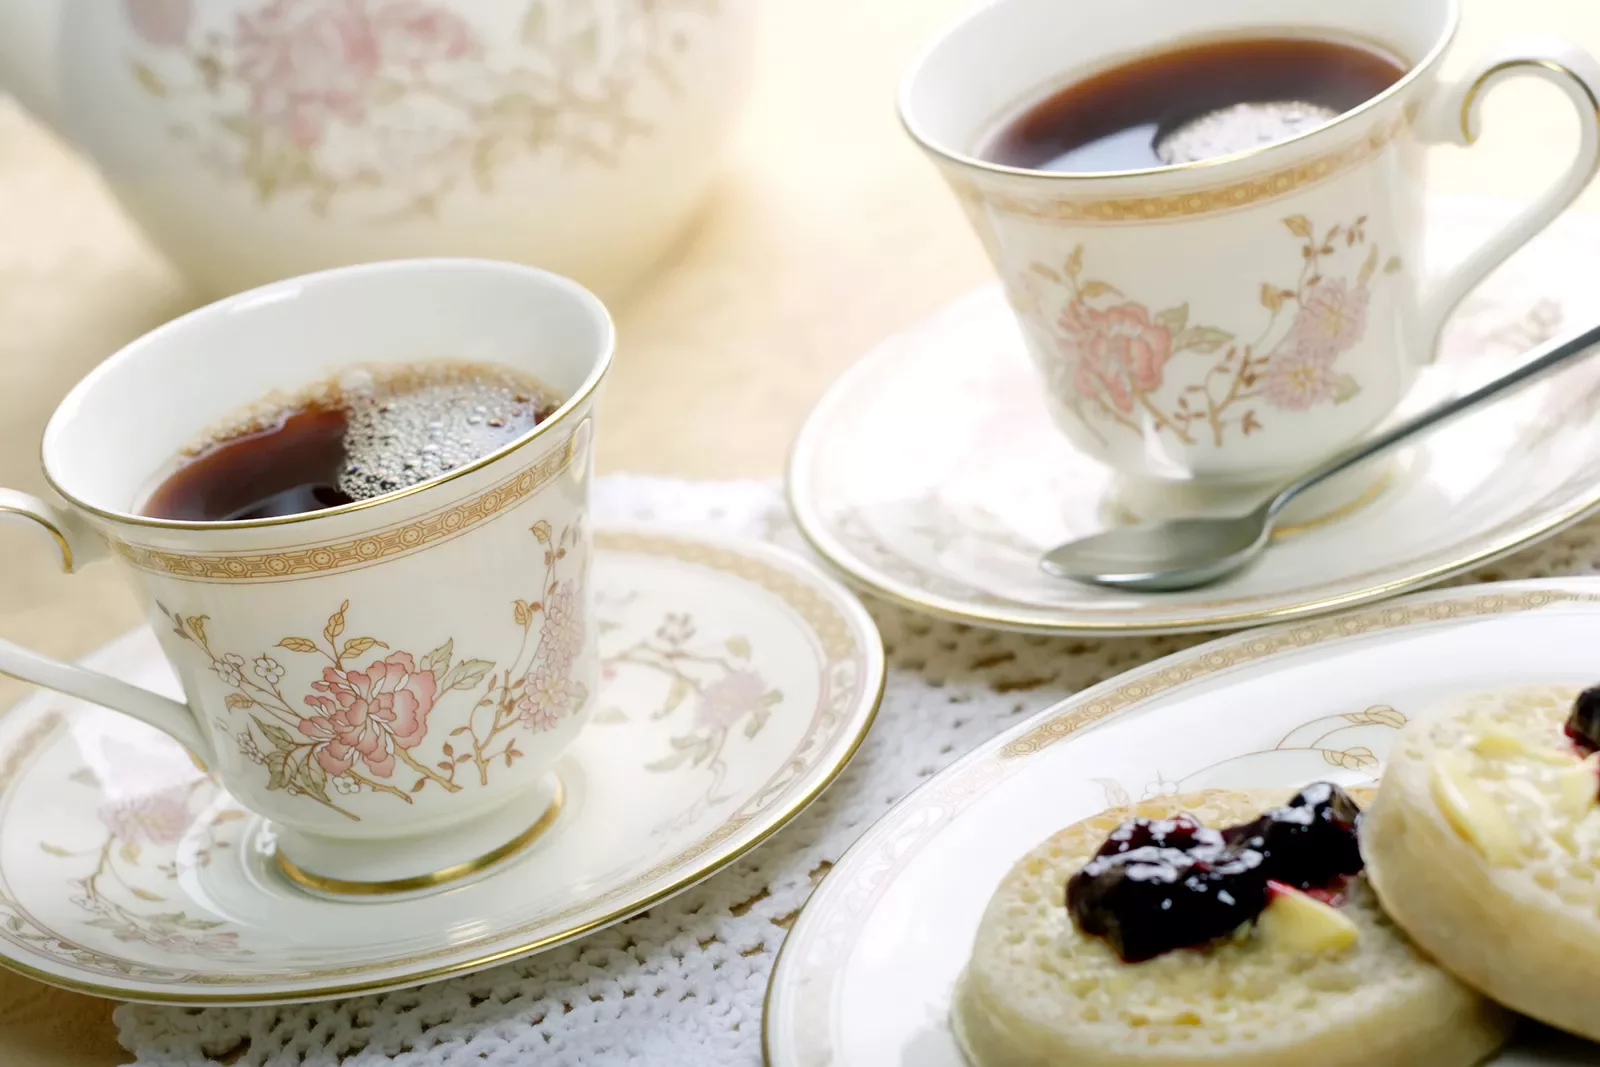 Ornate English cups of tea and english muffins with butter and jam.